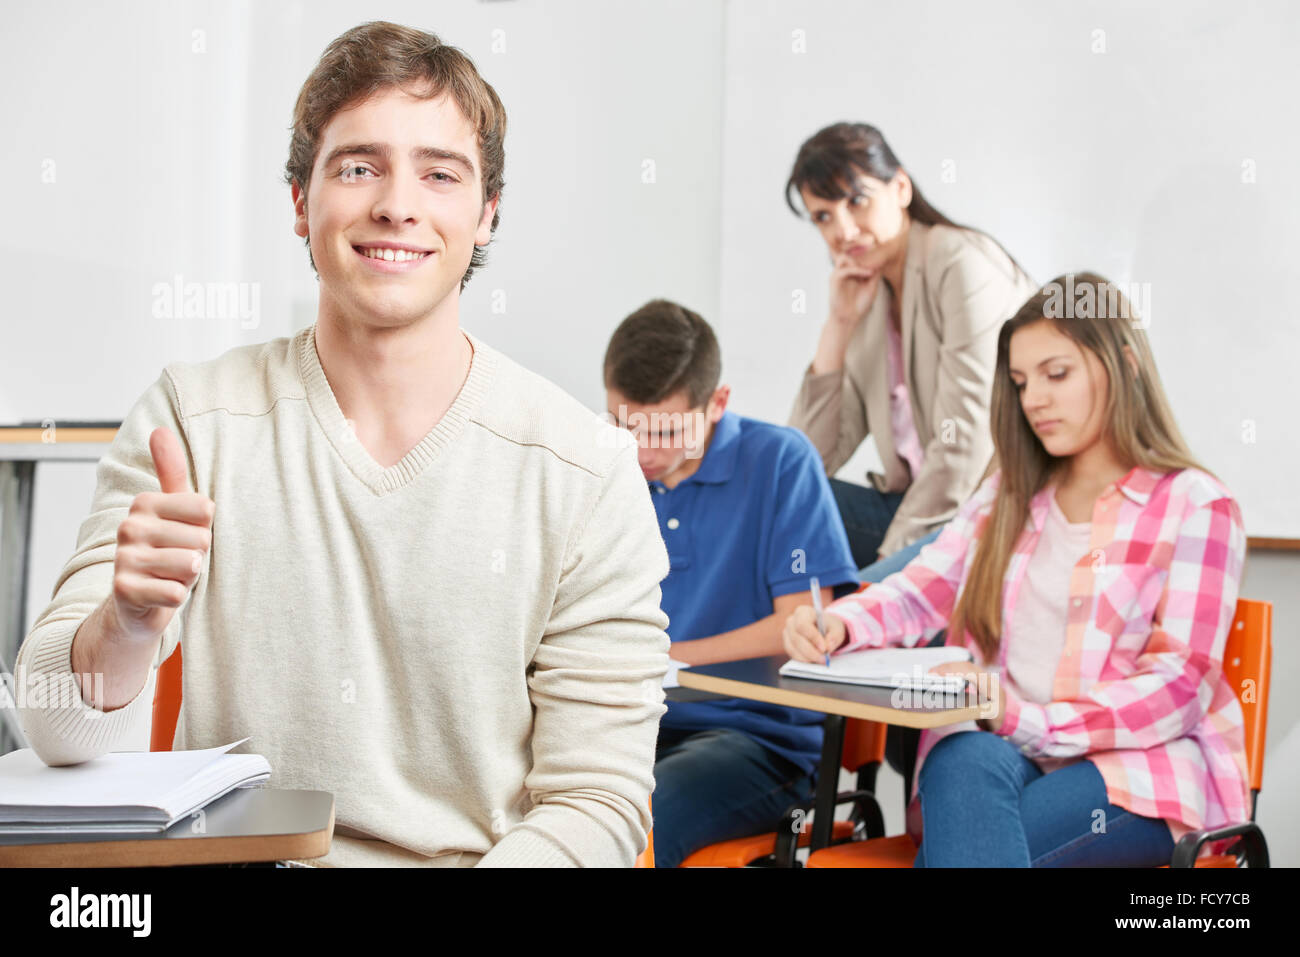 Teenage boy holding his thumb up during a test Stock Photo